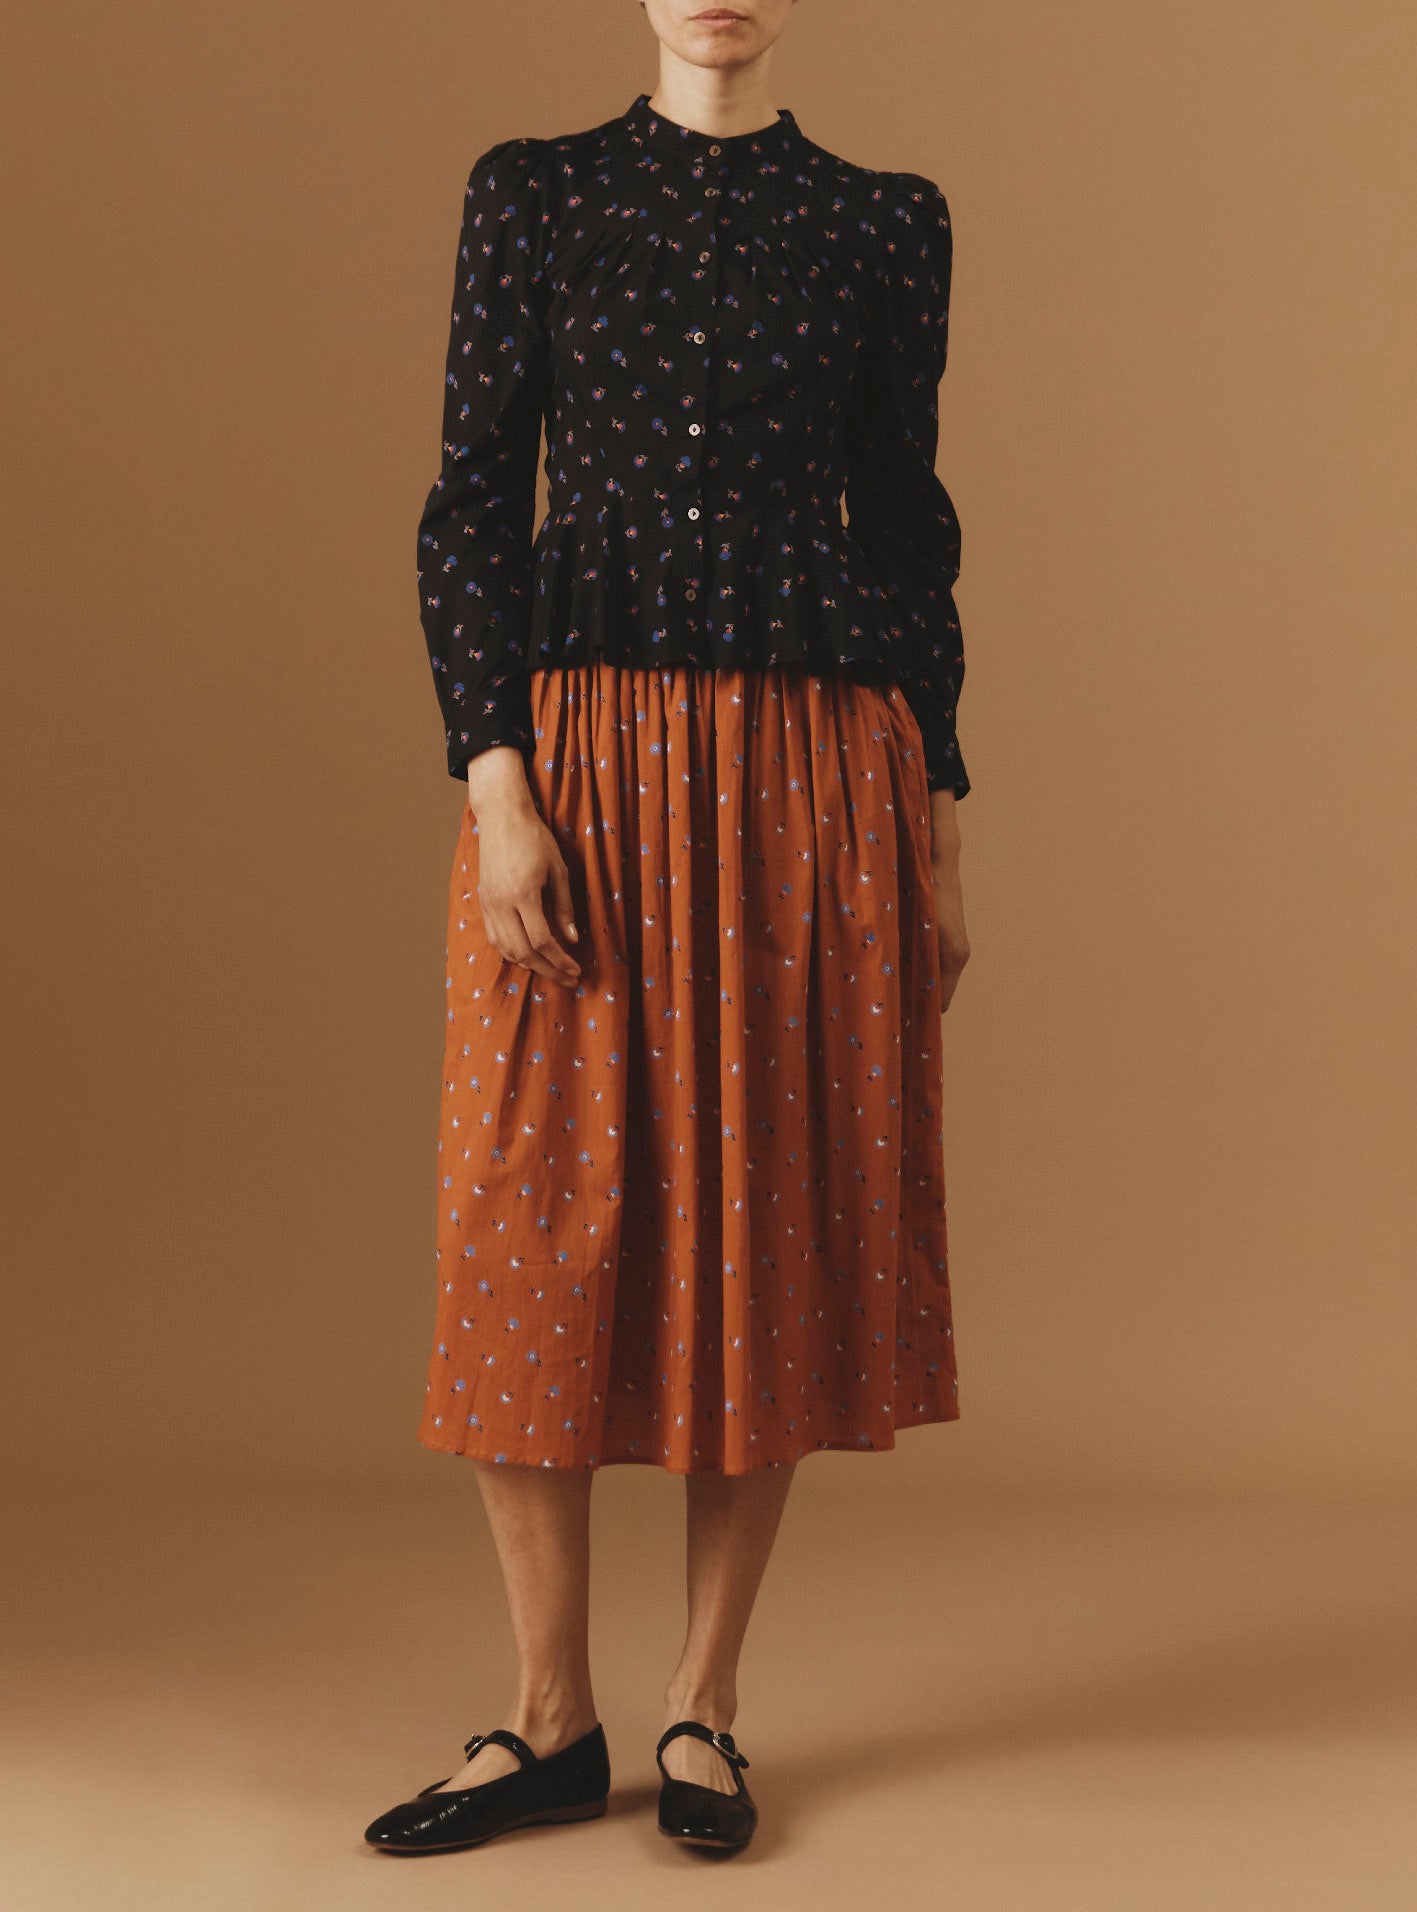 View front of Alix Black Carnation Print Blouse with Verde Orange Skirt  by Thierry Colson - Pre Spring